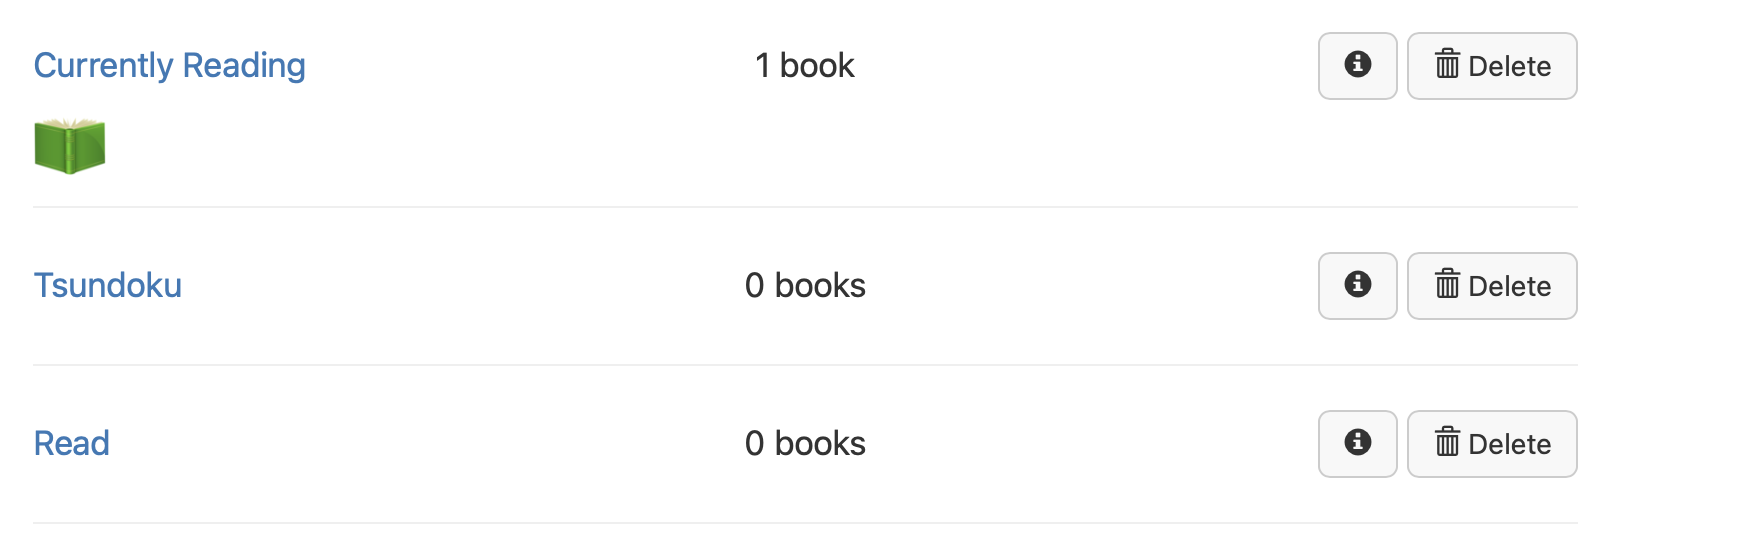 Screenshot of Bookshelves with generic book image for Kindle books.